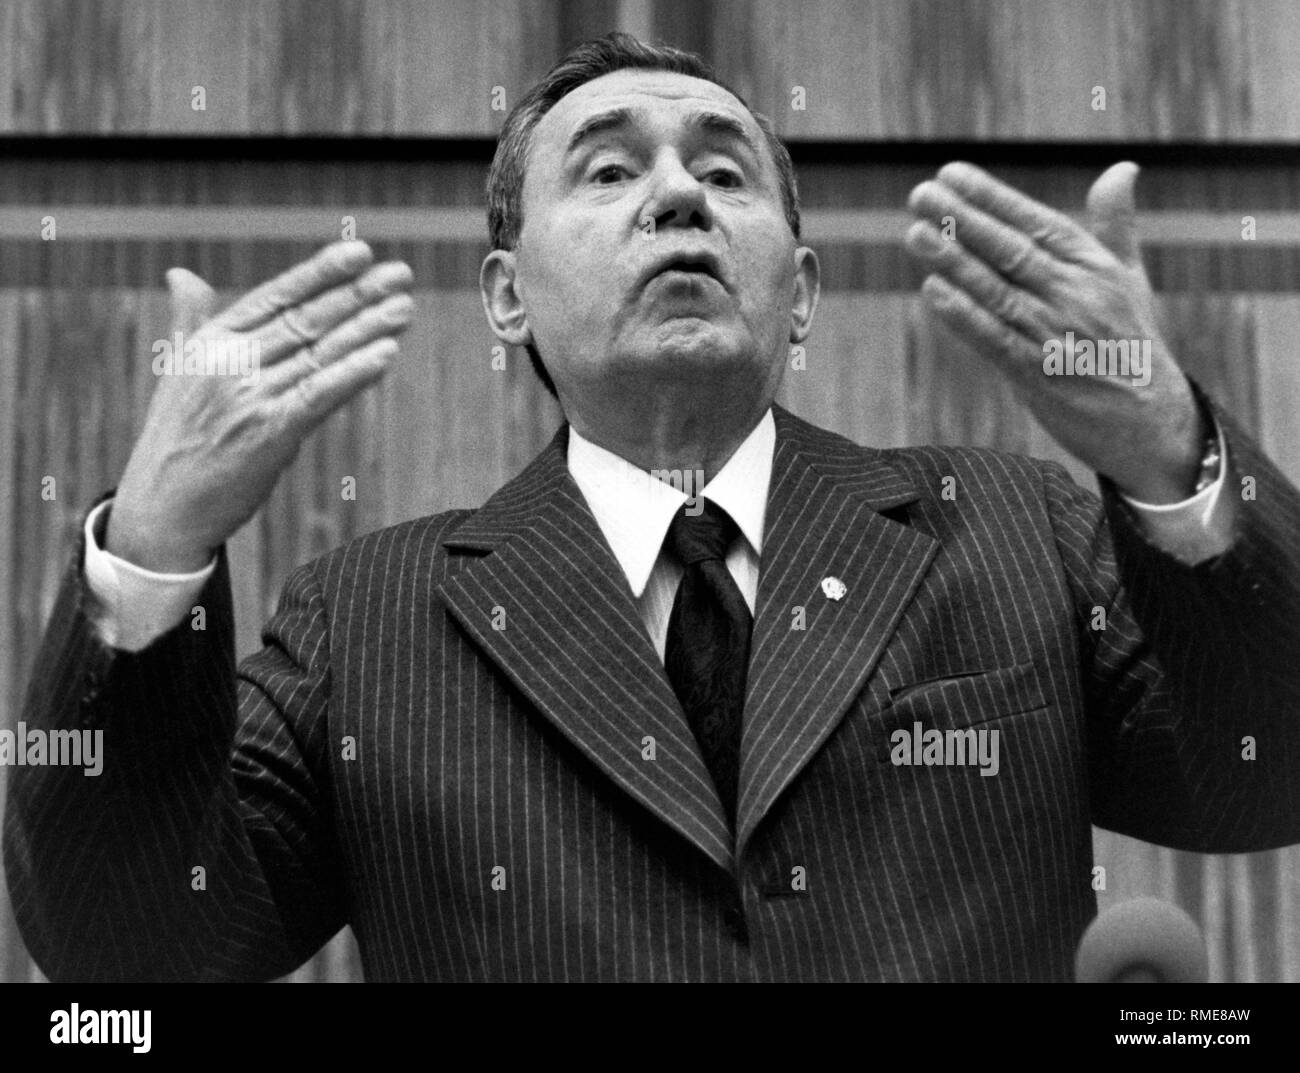 the-soviet-foreign-minister-andrei-gromyko-undated-photo-RME8AW.jpg